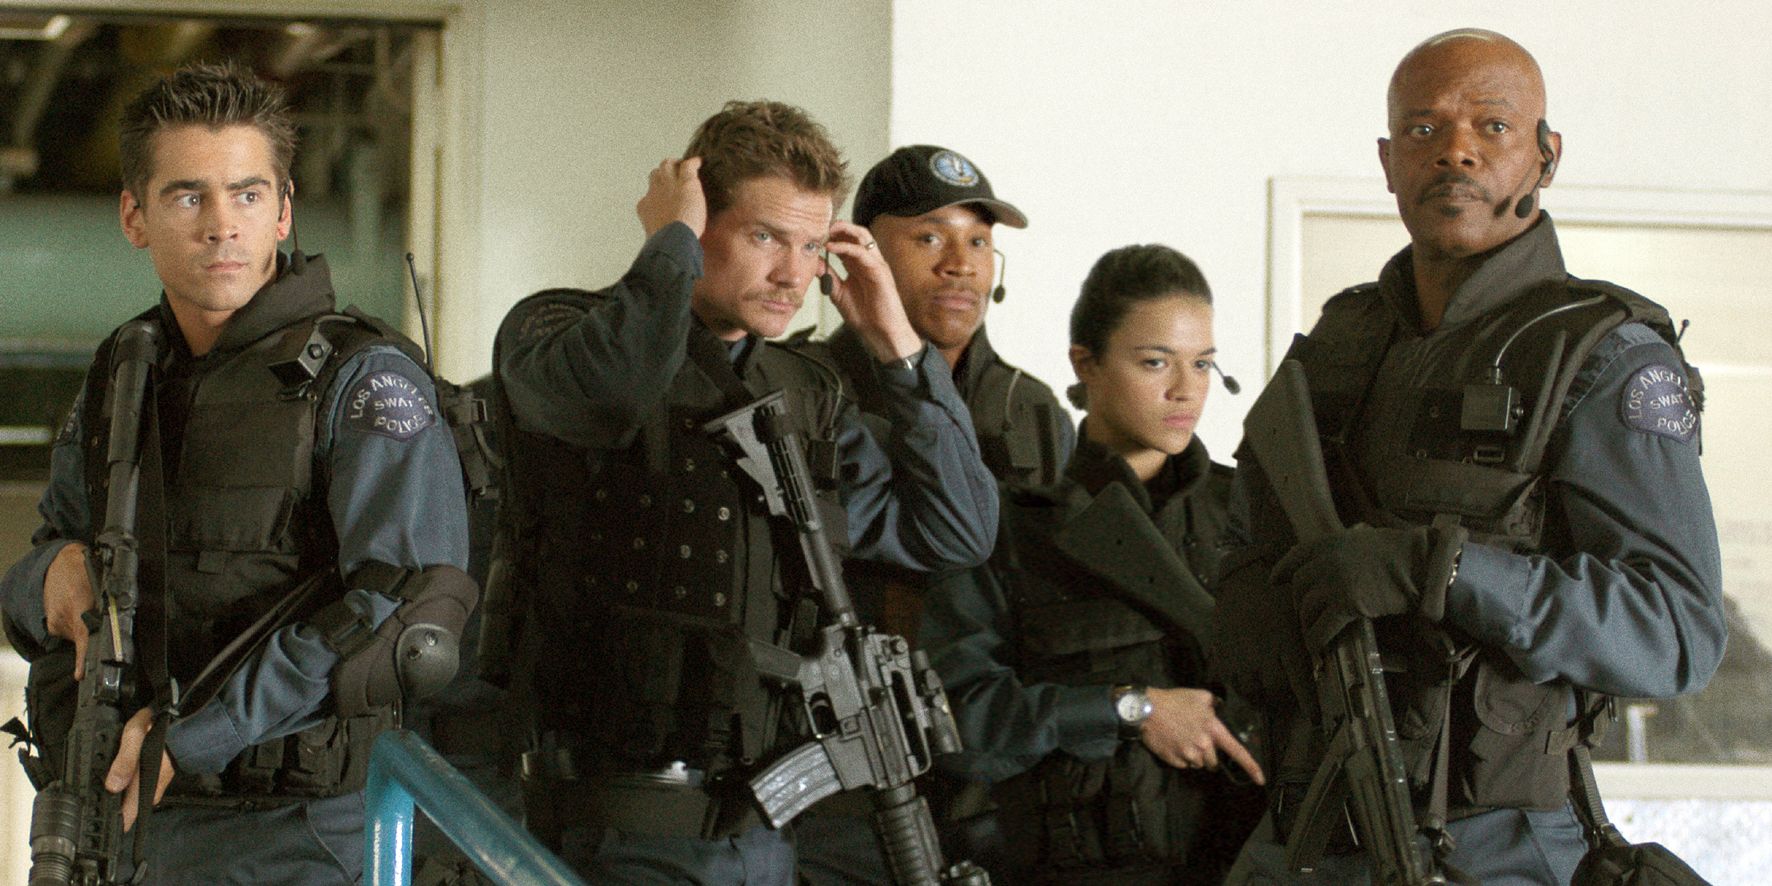 The cast of the 2003 film S.W.A.T.